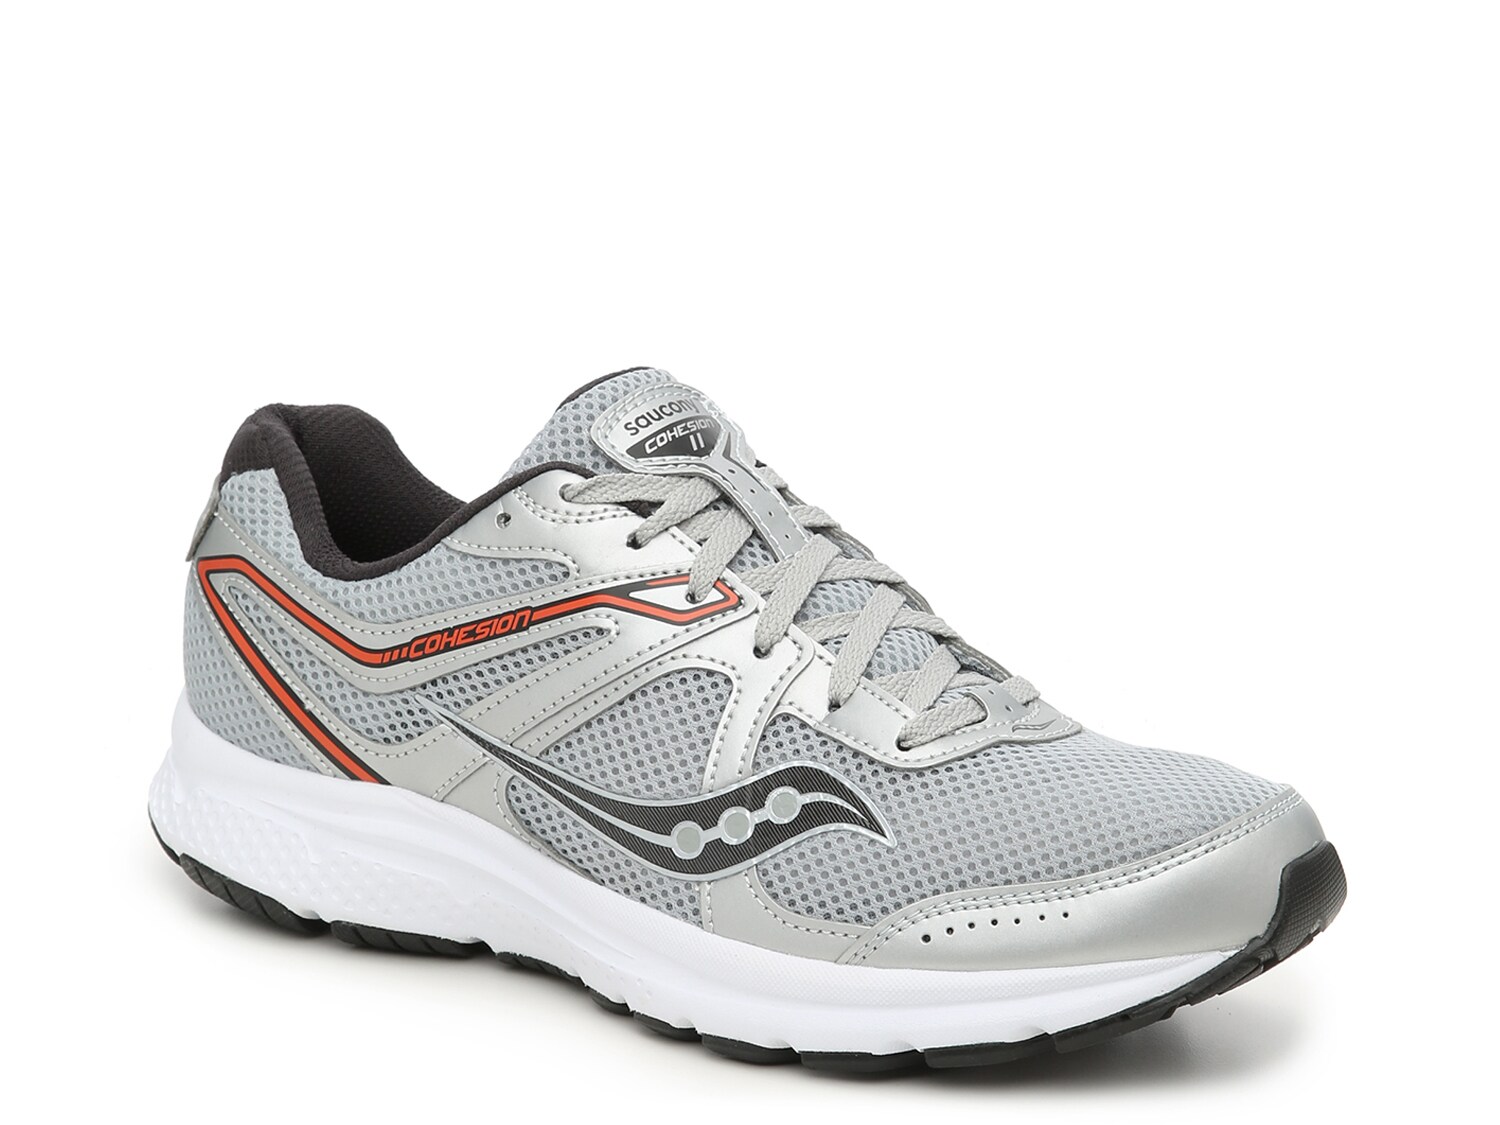 saucony men's cohesion 11 running shoes